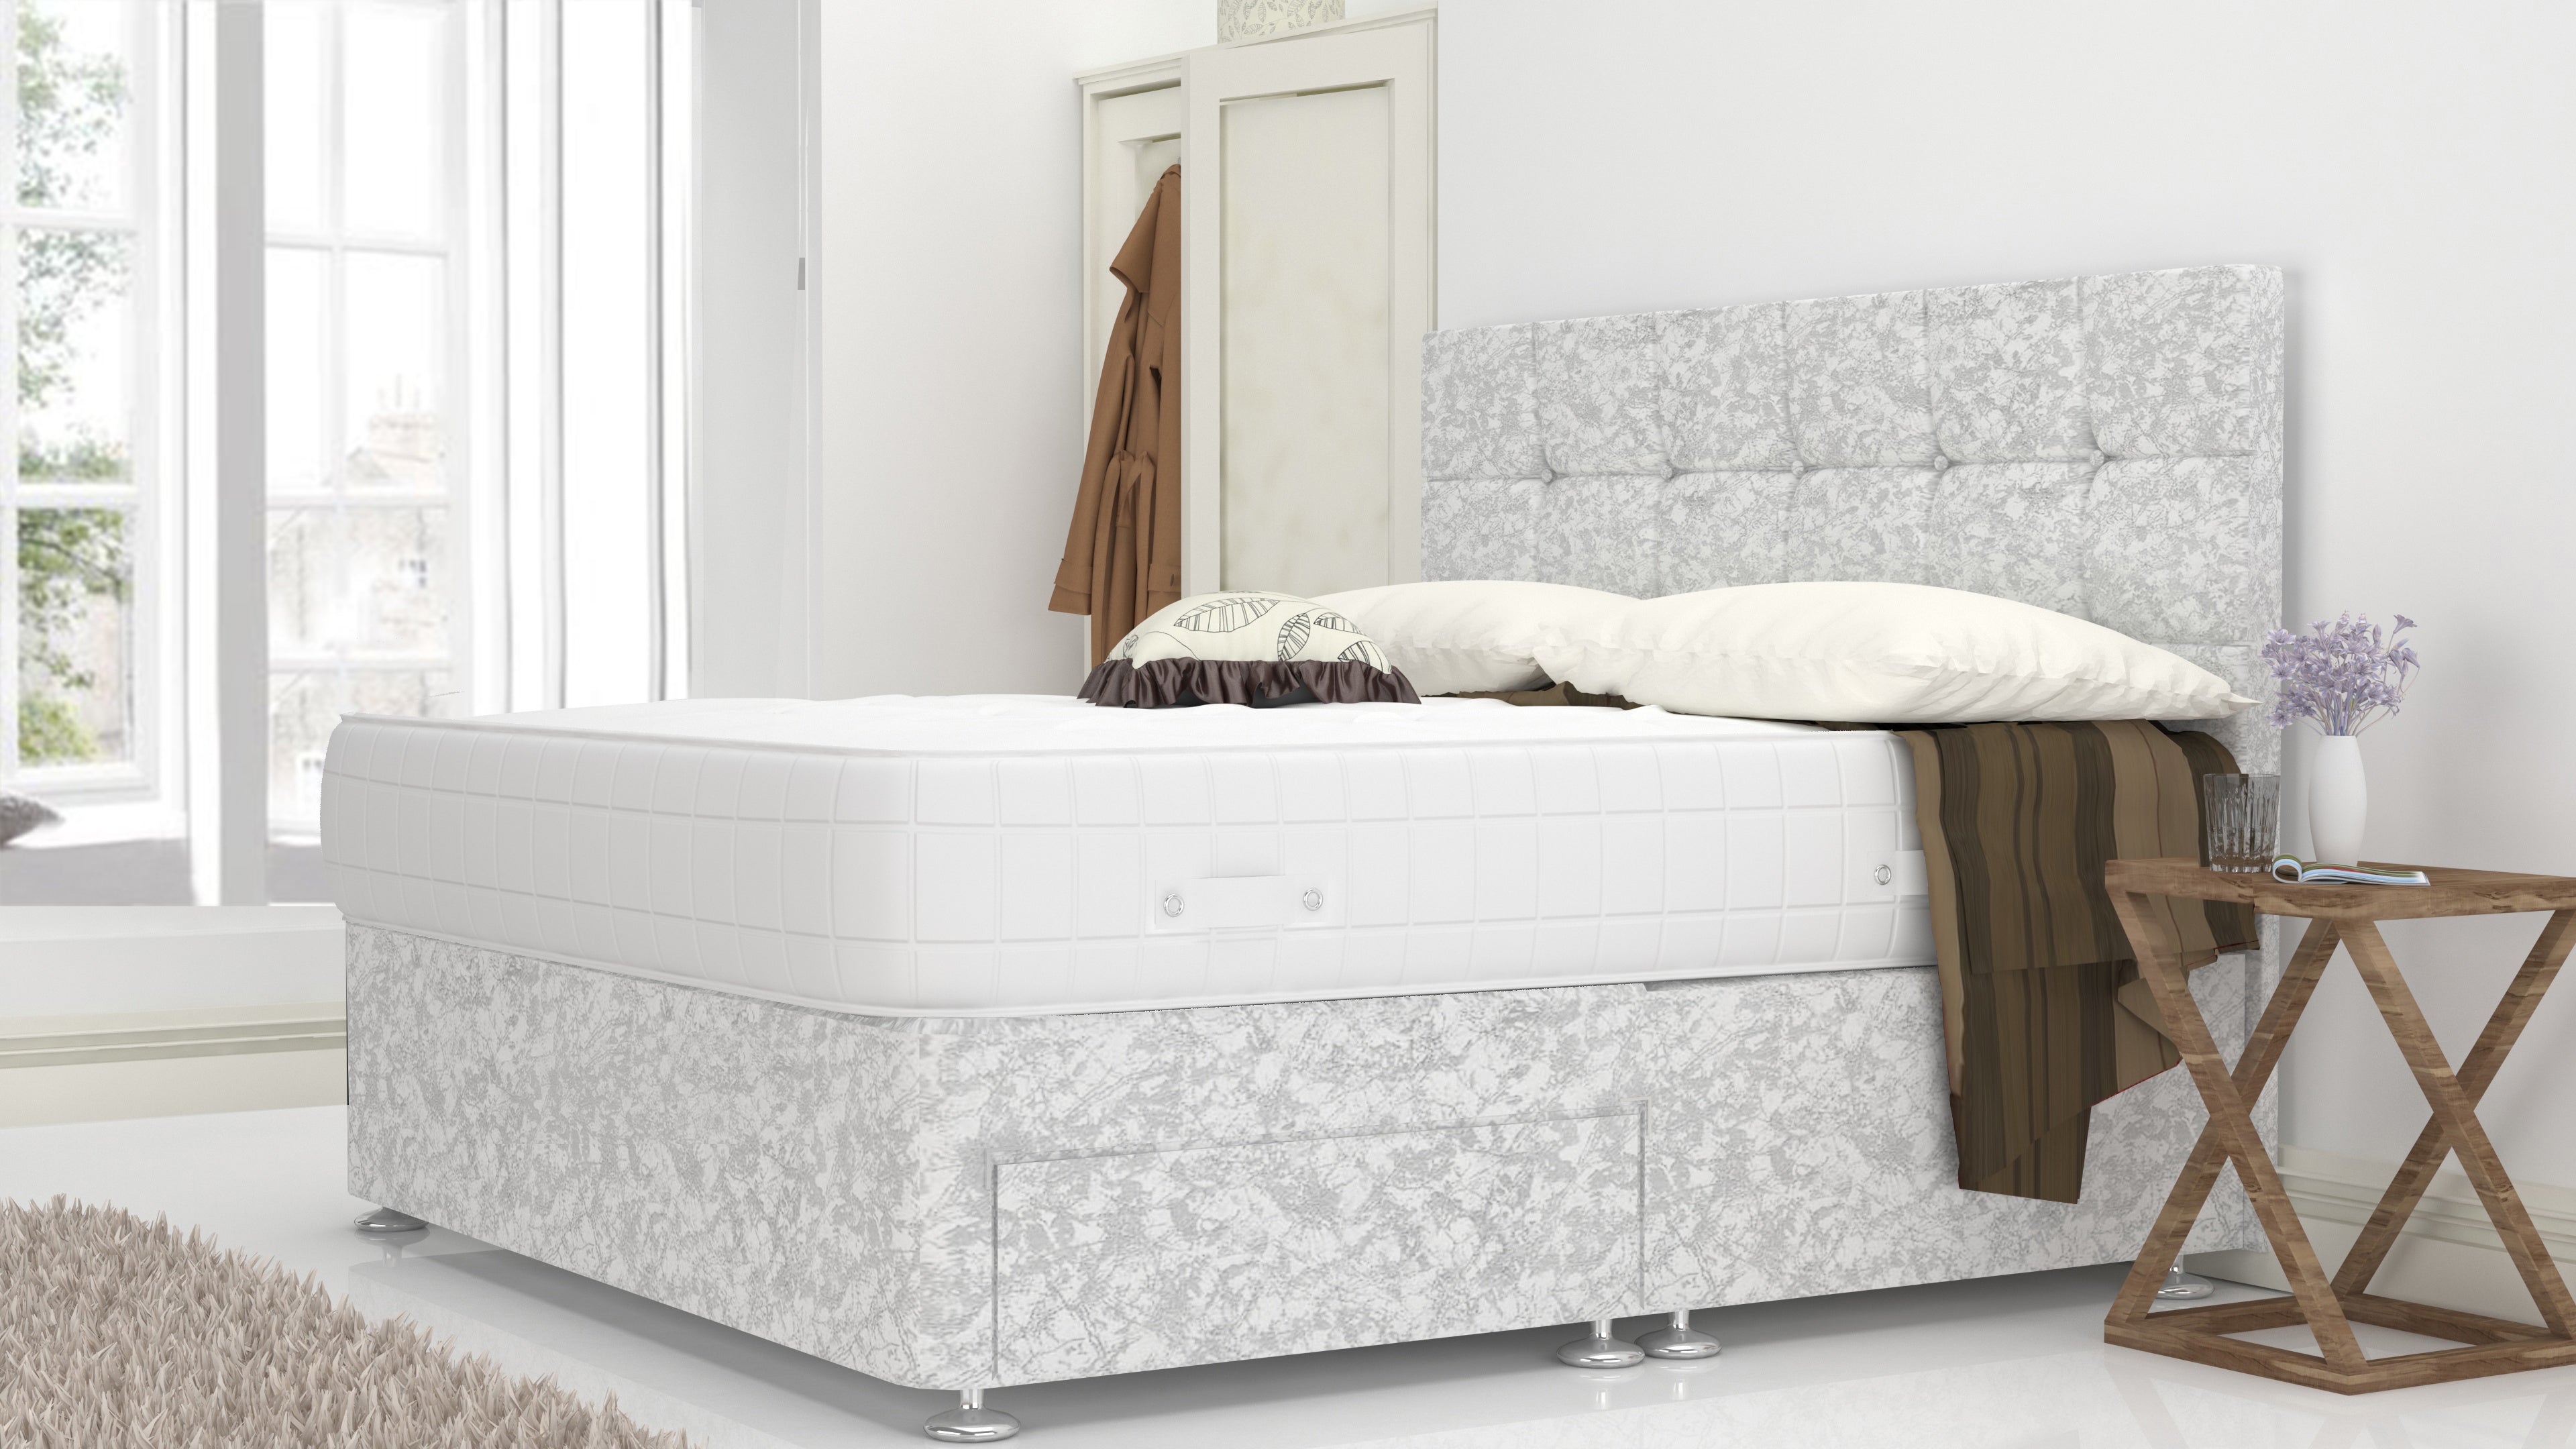 White Crushed Velvet 6 Feet Divan Bed With Cube Headboard (Included Feet) And Free Orthopedic Mattress